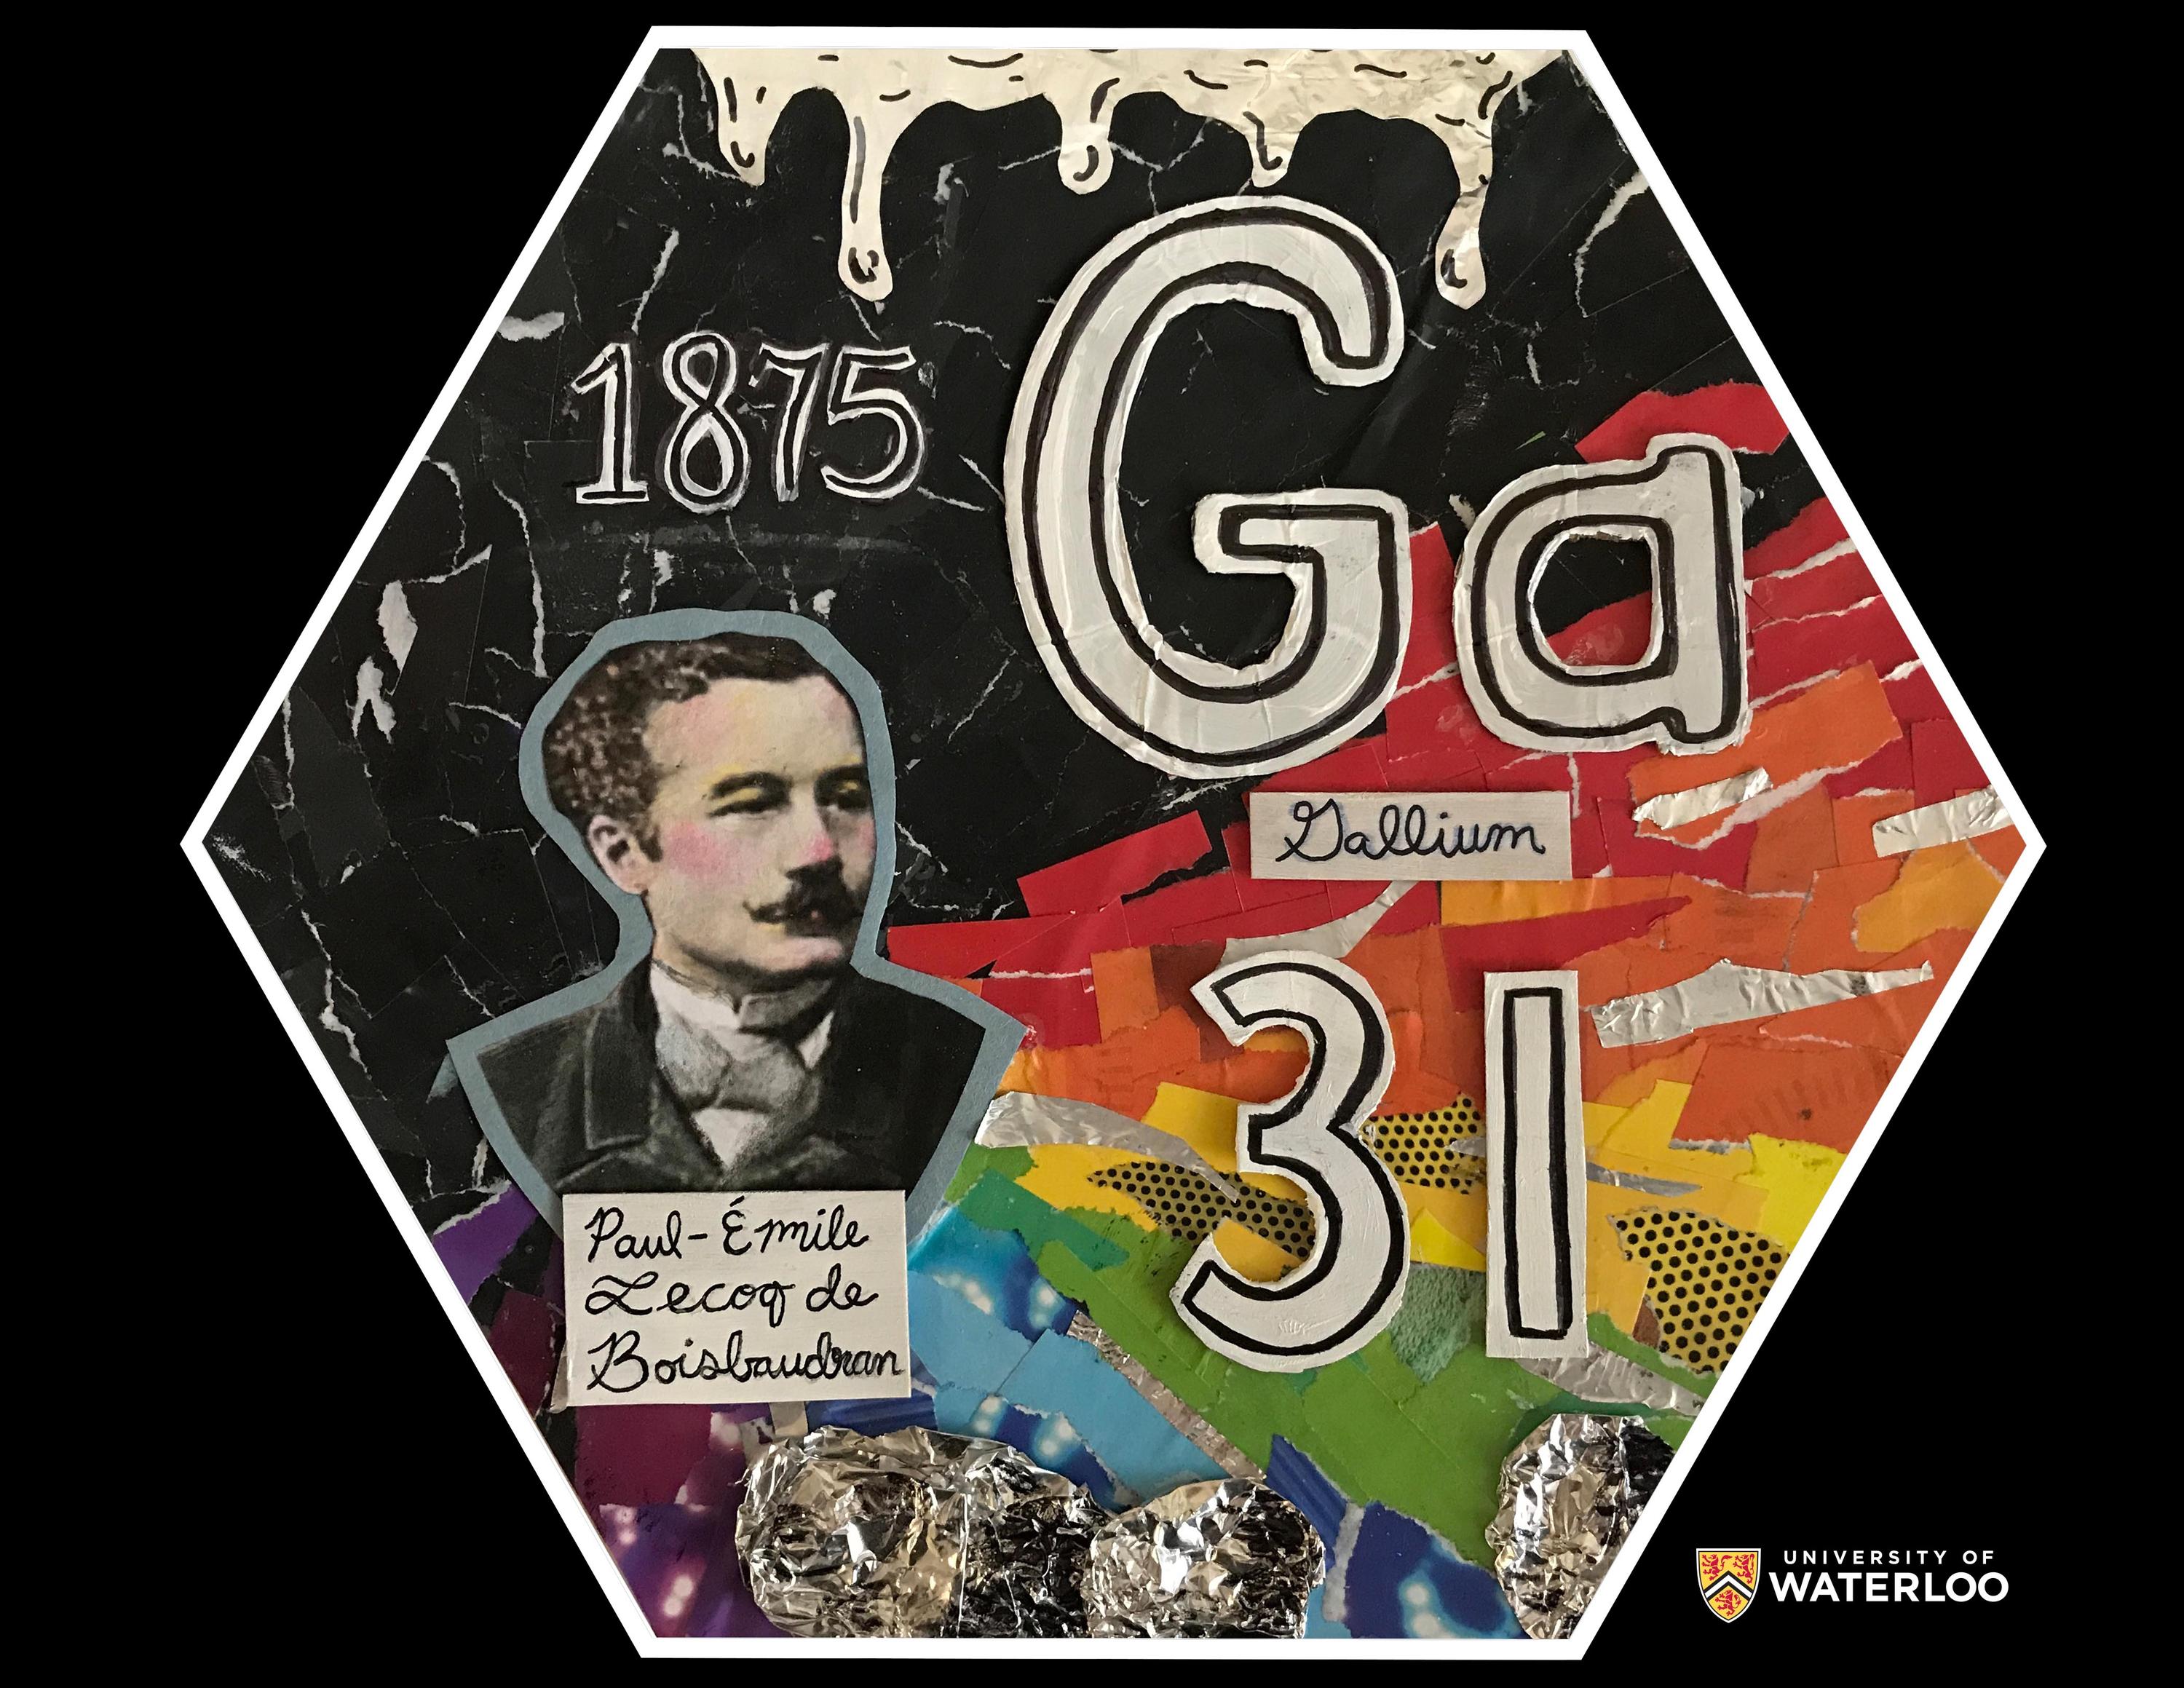 Collage of paper and aluminum foil on black background. Chemical symbol “Ga” appears over “Gallium” and atomic number “31”. Left is a portrait of Paul - Émile LeCoq de Boisbaudran with “1875” above him. Strips of paper radiating out in rainbow colours. Flattened aluminum foil circles appear bottom with “dripping” white paint at the top.